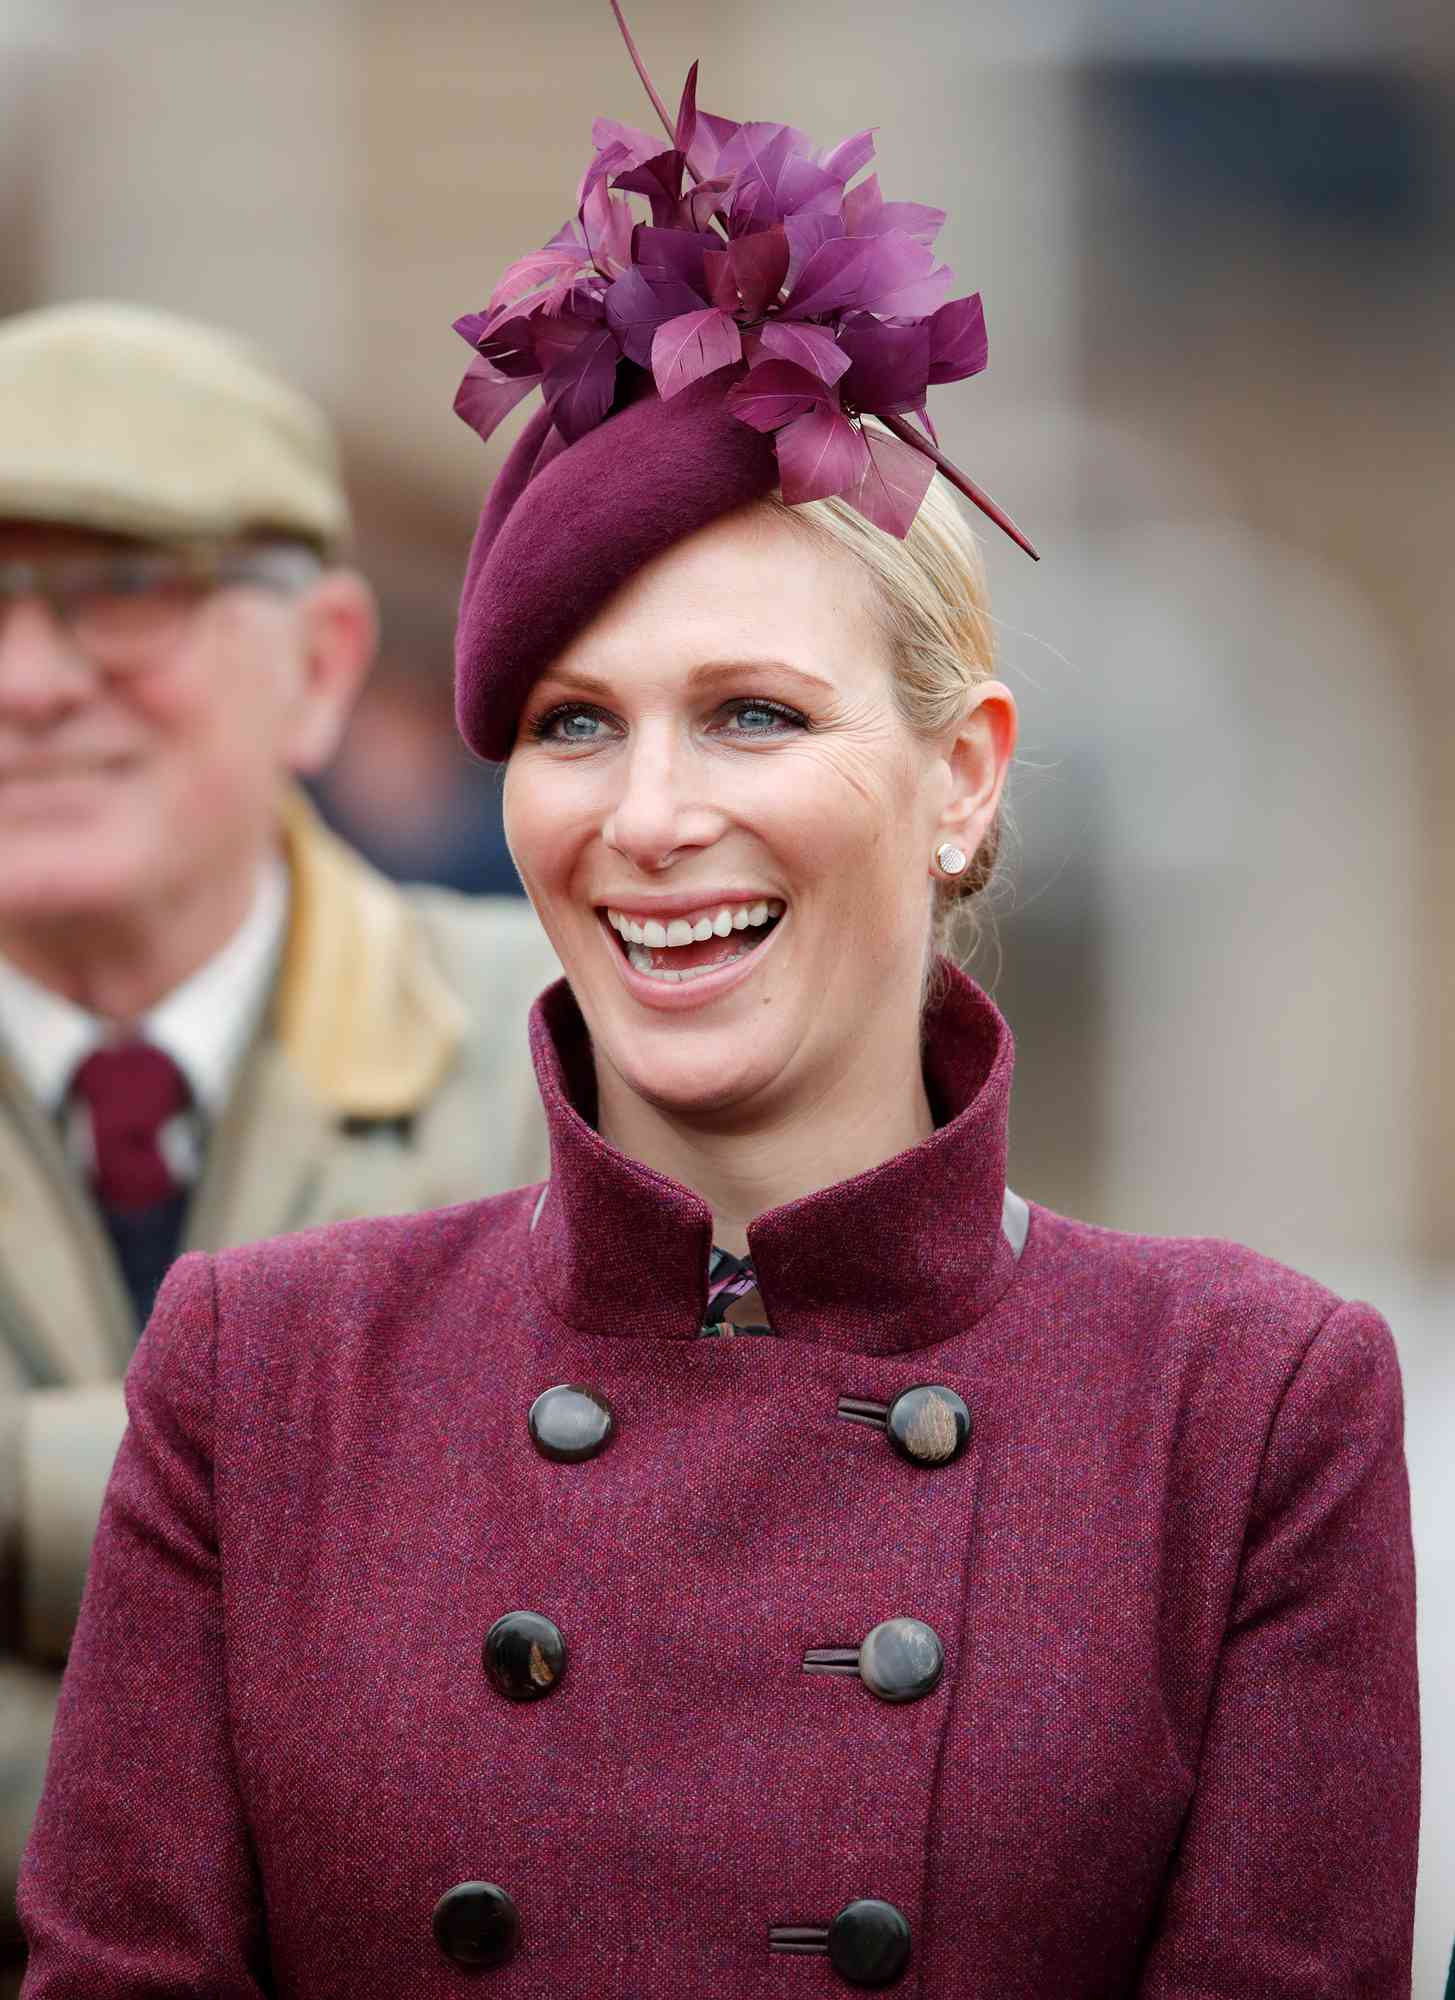 Zara Tindall watches the racing as she attends day 2 'Ladies Day' of the Cheltenham Festival at Cheltenham Racecourse on March 13, 2019 in Cheltenham, England